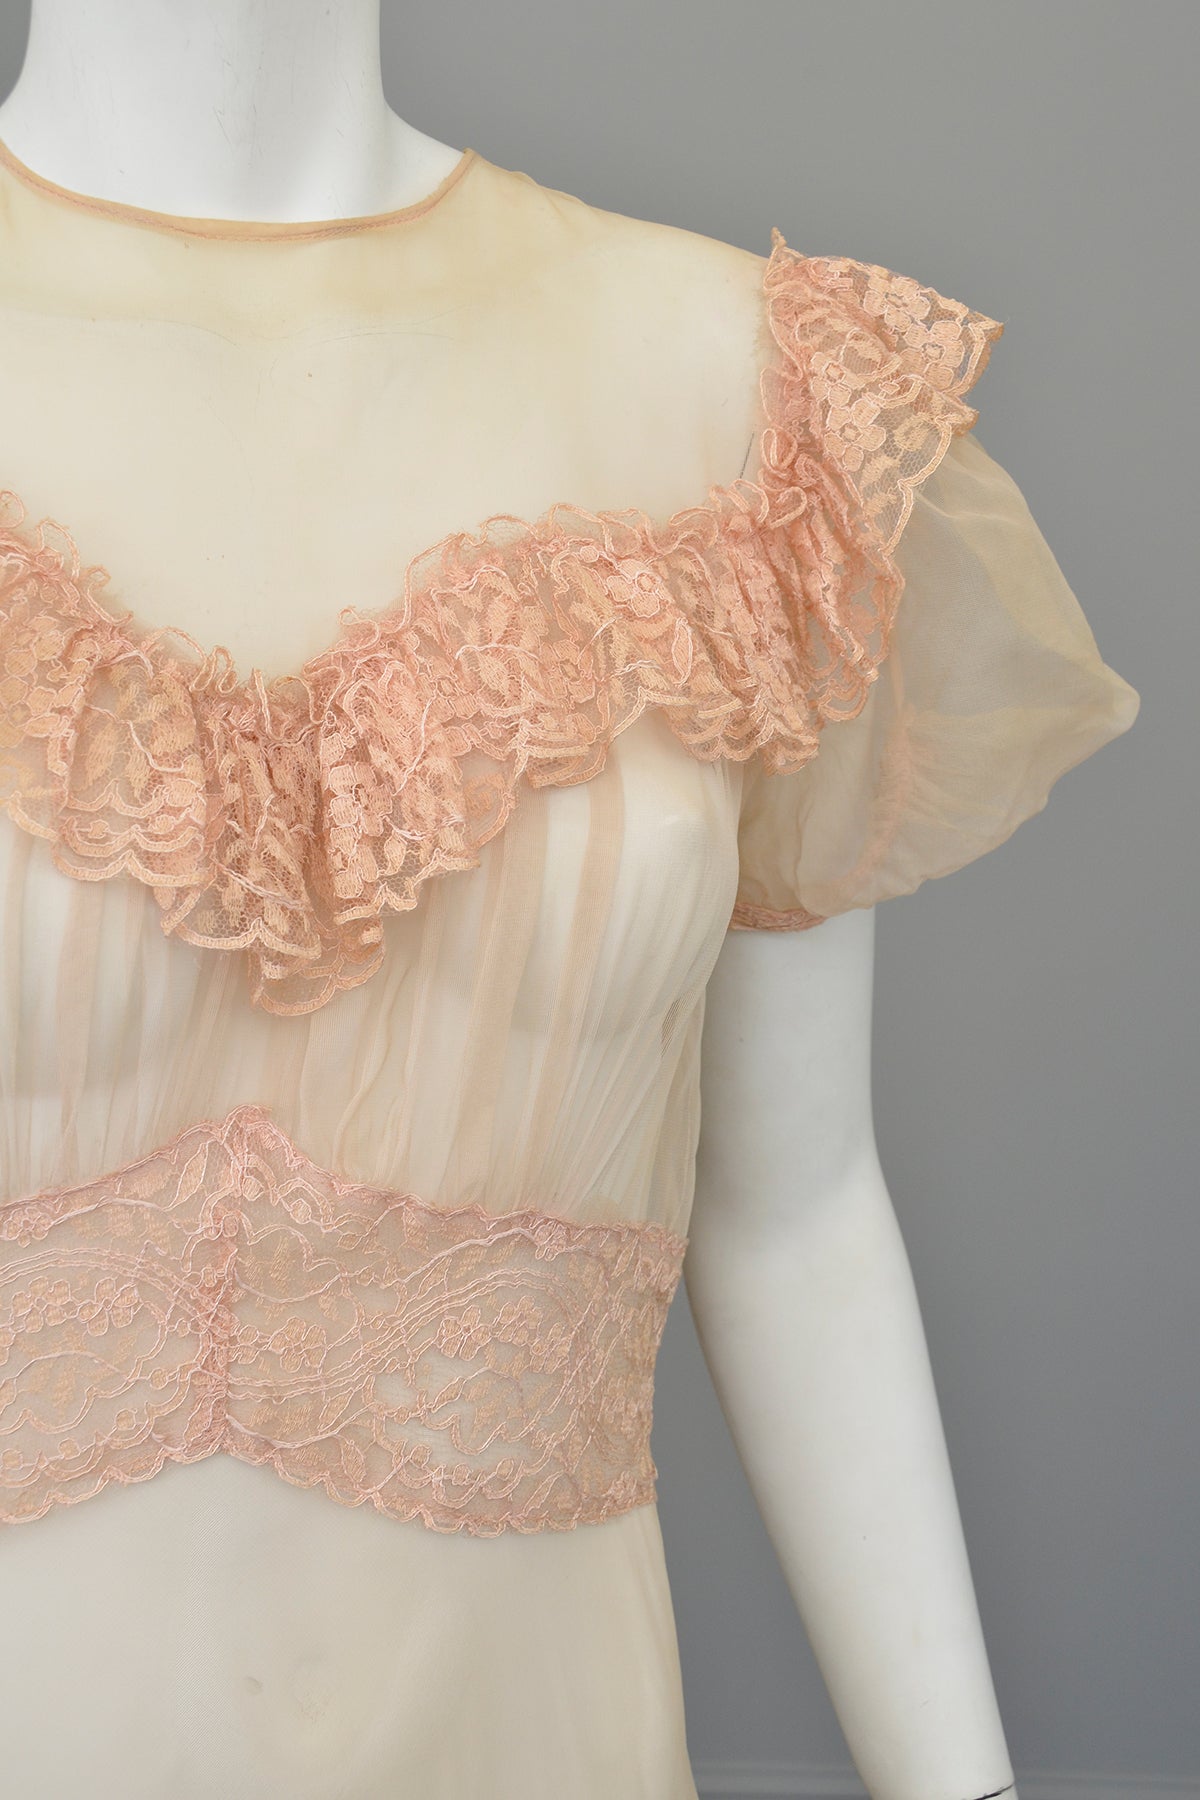 1930s Shell Pink Lace Ruffles Puff Sleeves Gown | Mesh Netting | Restoration or Study